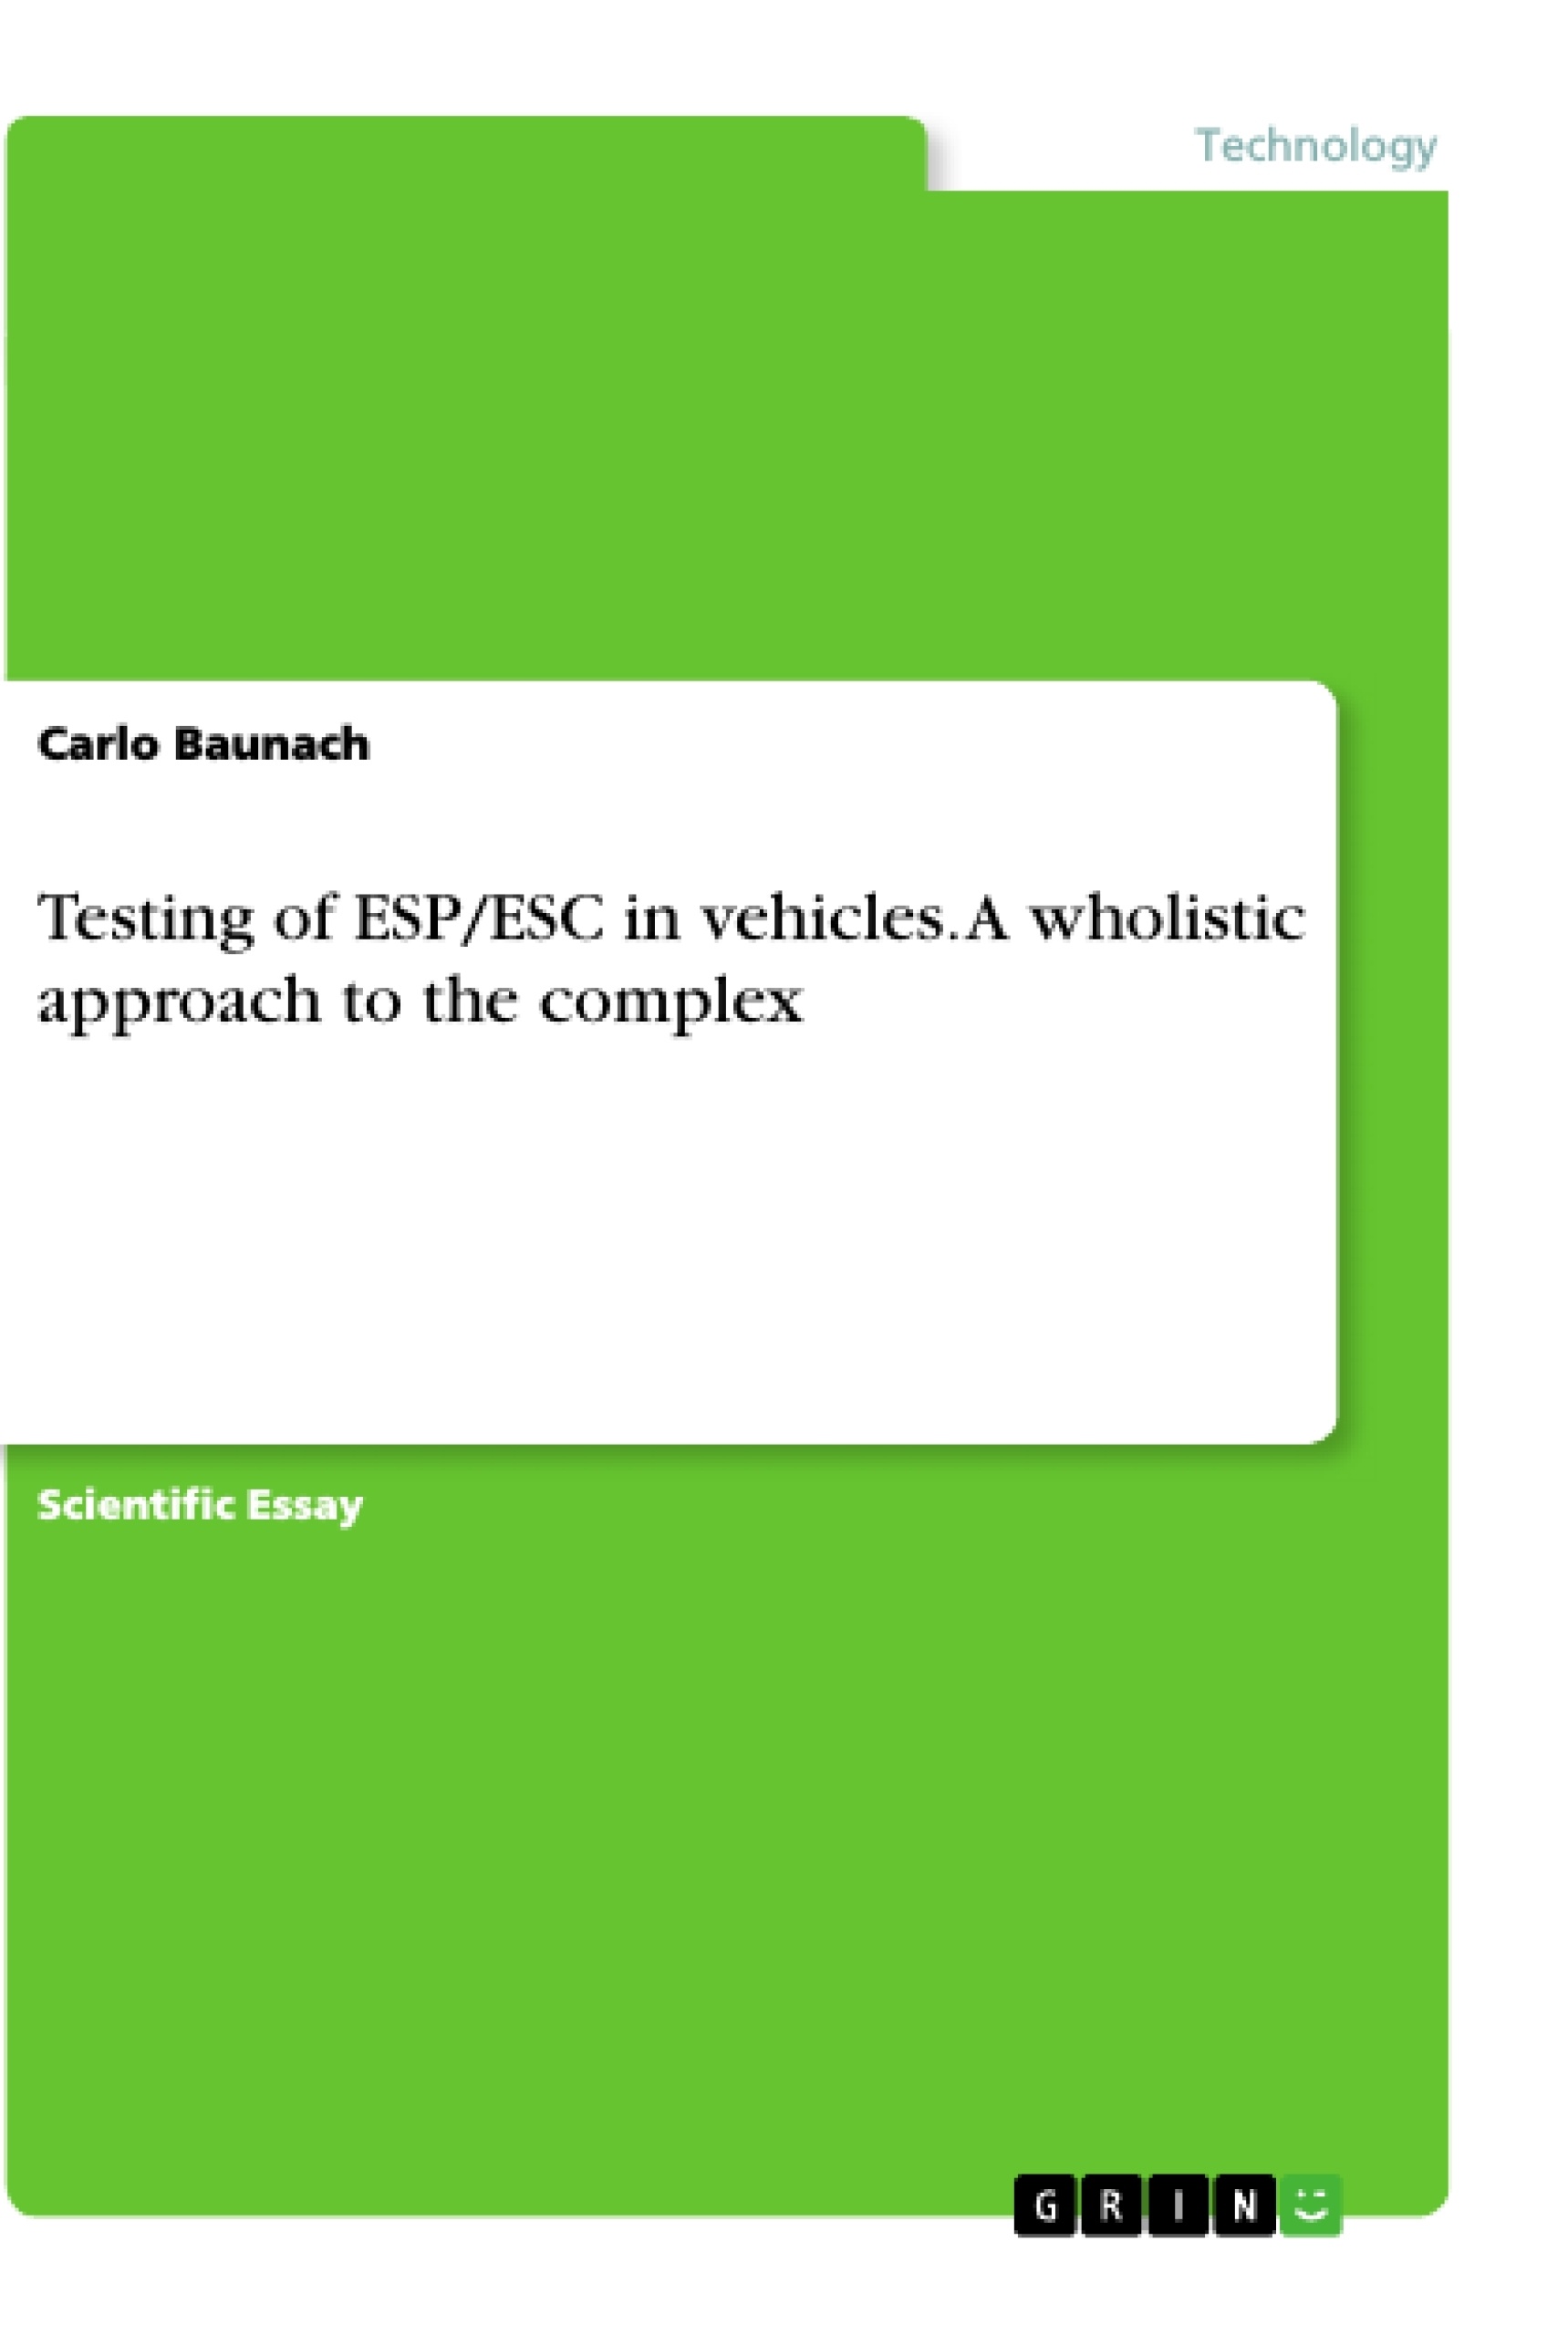 Título: Testing of ESP/ESC in vehicles. A wholistic approach to the complex